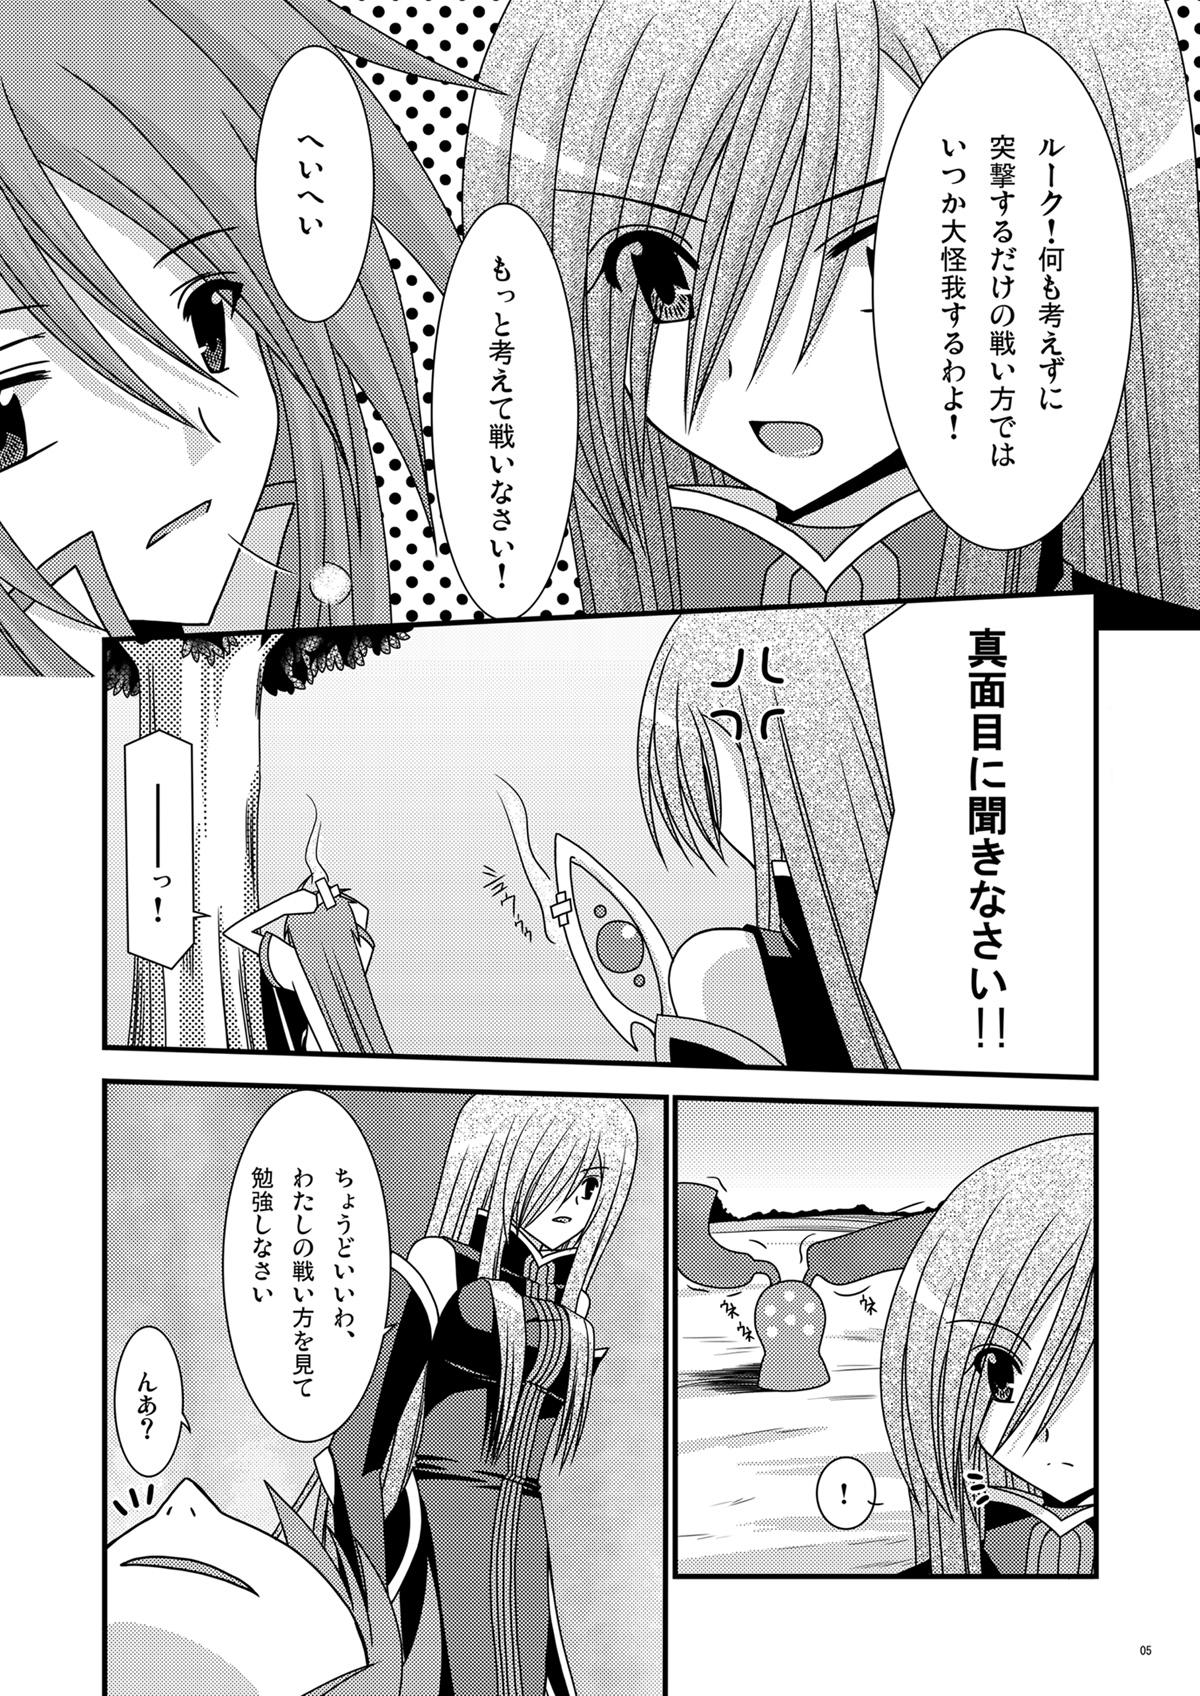 Porno 18 Shokushu Kantan - Tales of the abyss Piss - Page 5